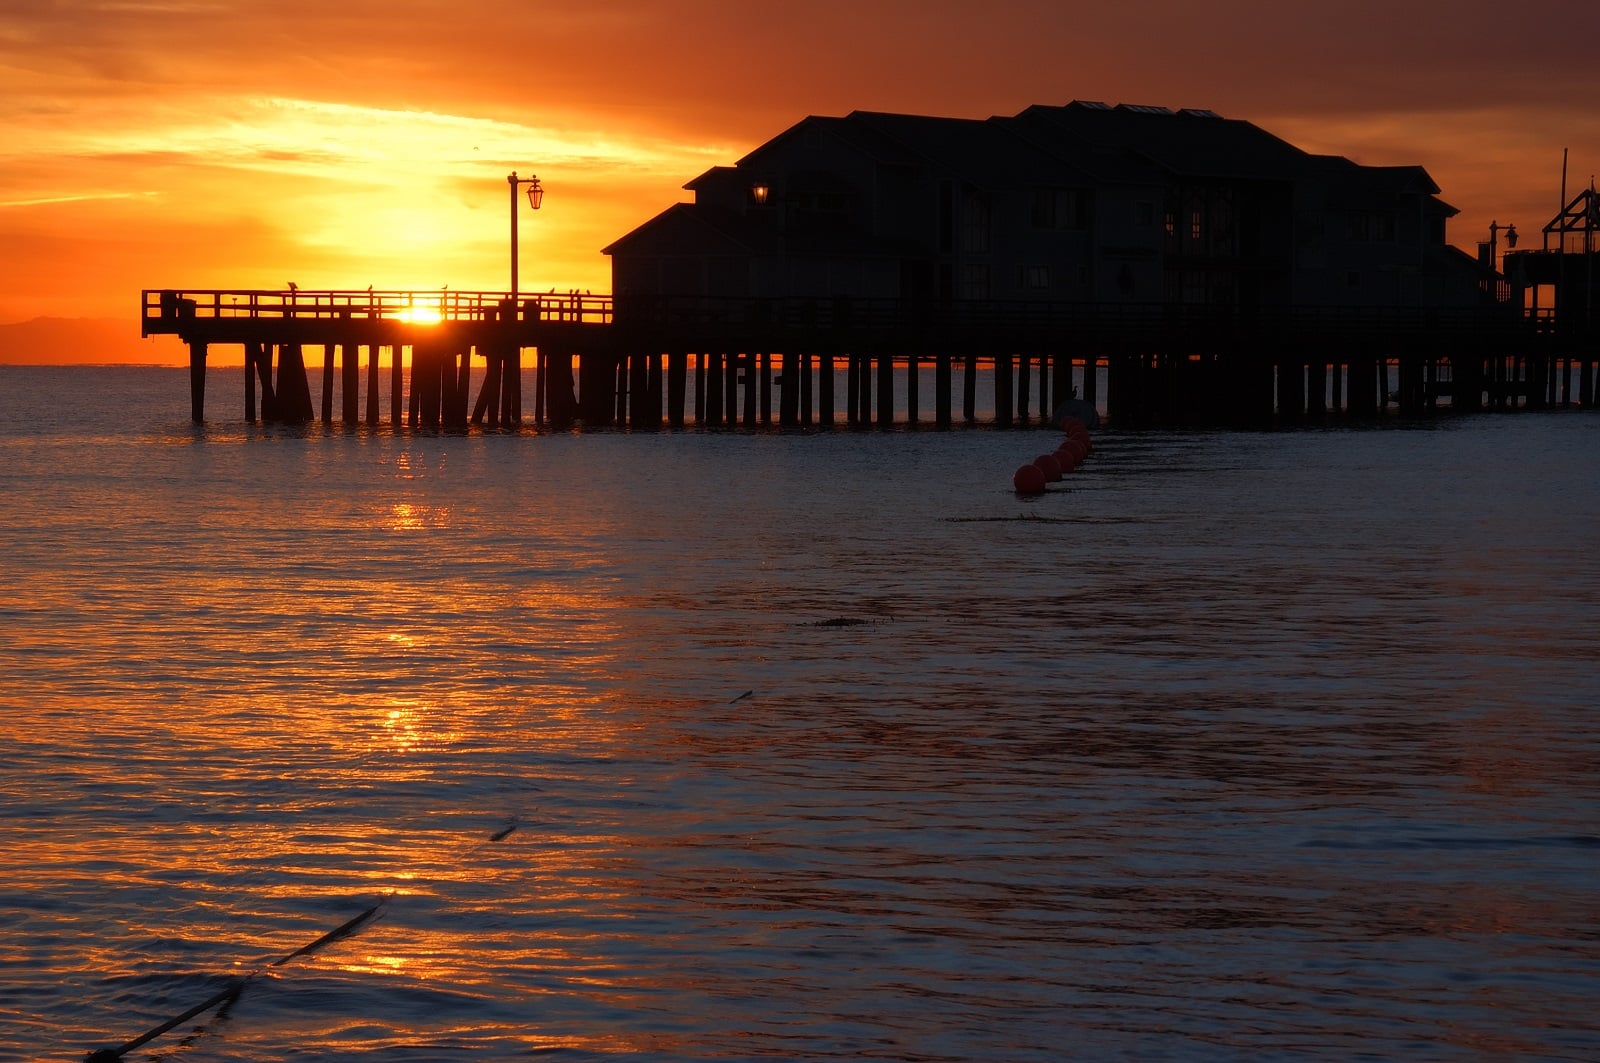 <p><span>End a day in Santa Barbara with a visit to Stearns Wharf. As the oldest operating wharf in California, it offers a charming backdrop for a spectacular sunset. The wharf extends into the ocean, providing a unique vantage point to watch the sun dip below the horizon.</span></p> <p><b>Insider’s Tip: </b><span>Try local seafood at one of the wharf’s restaurants for a perfect end to your day.</span></p>